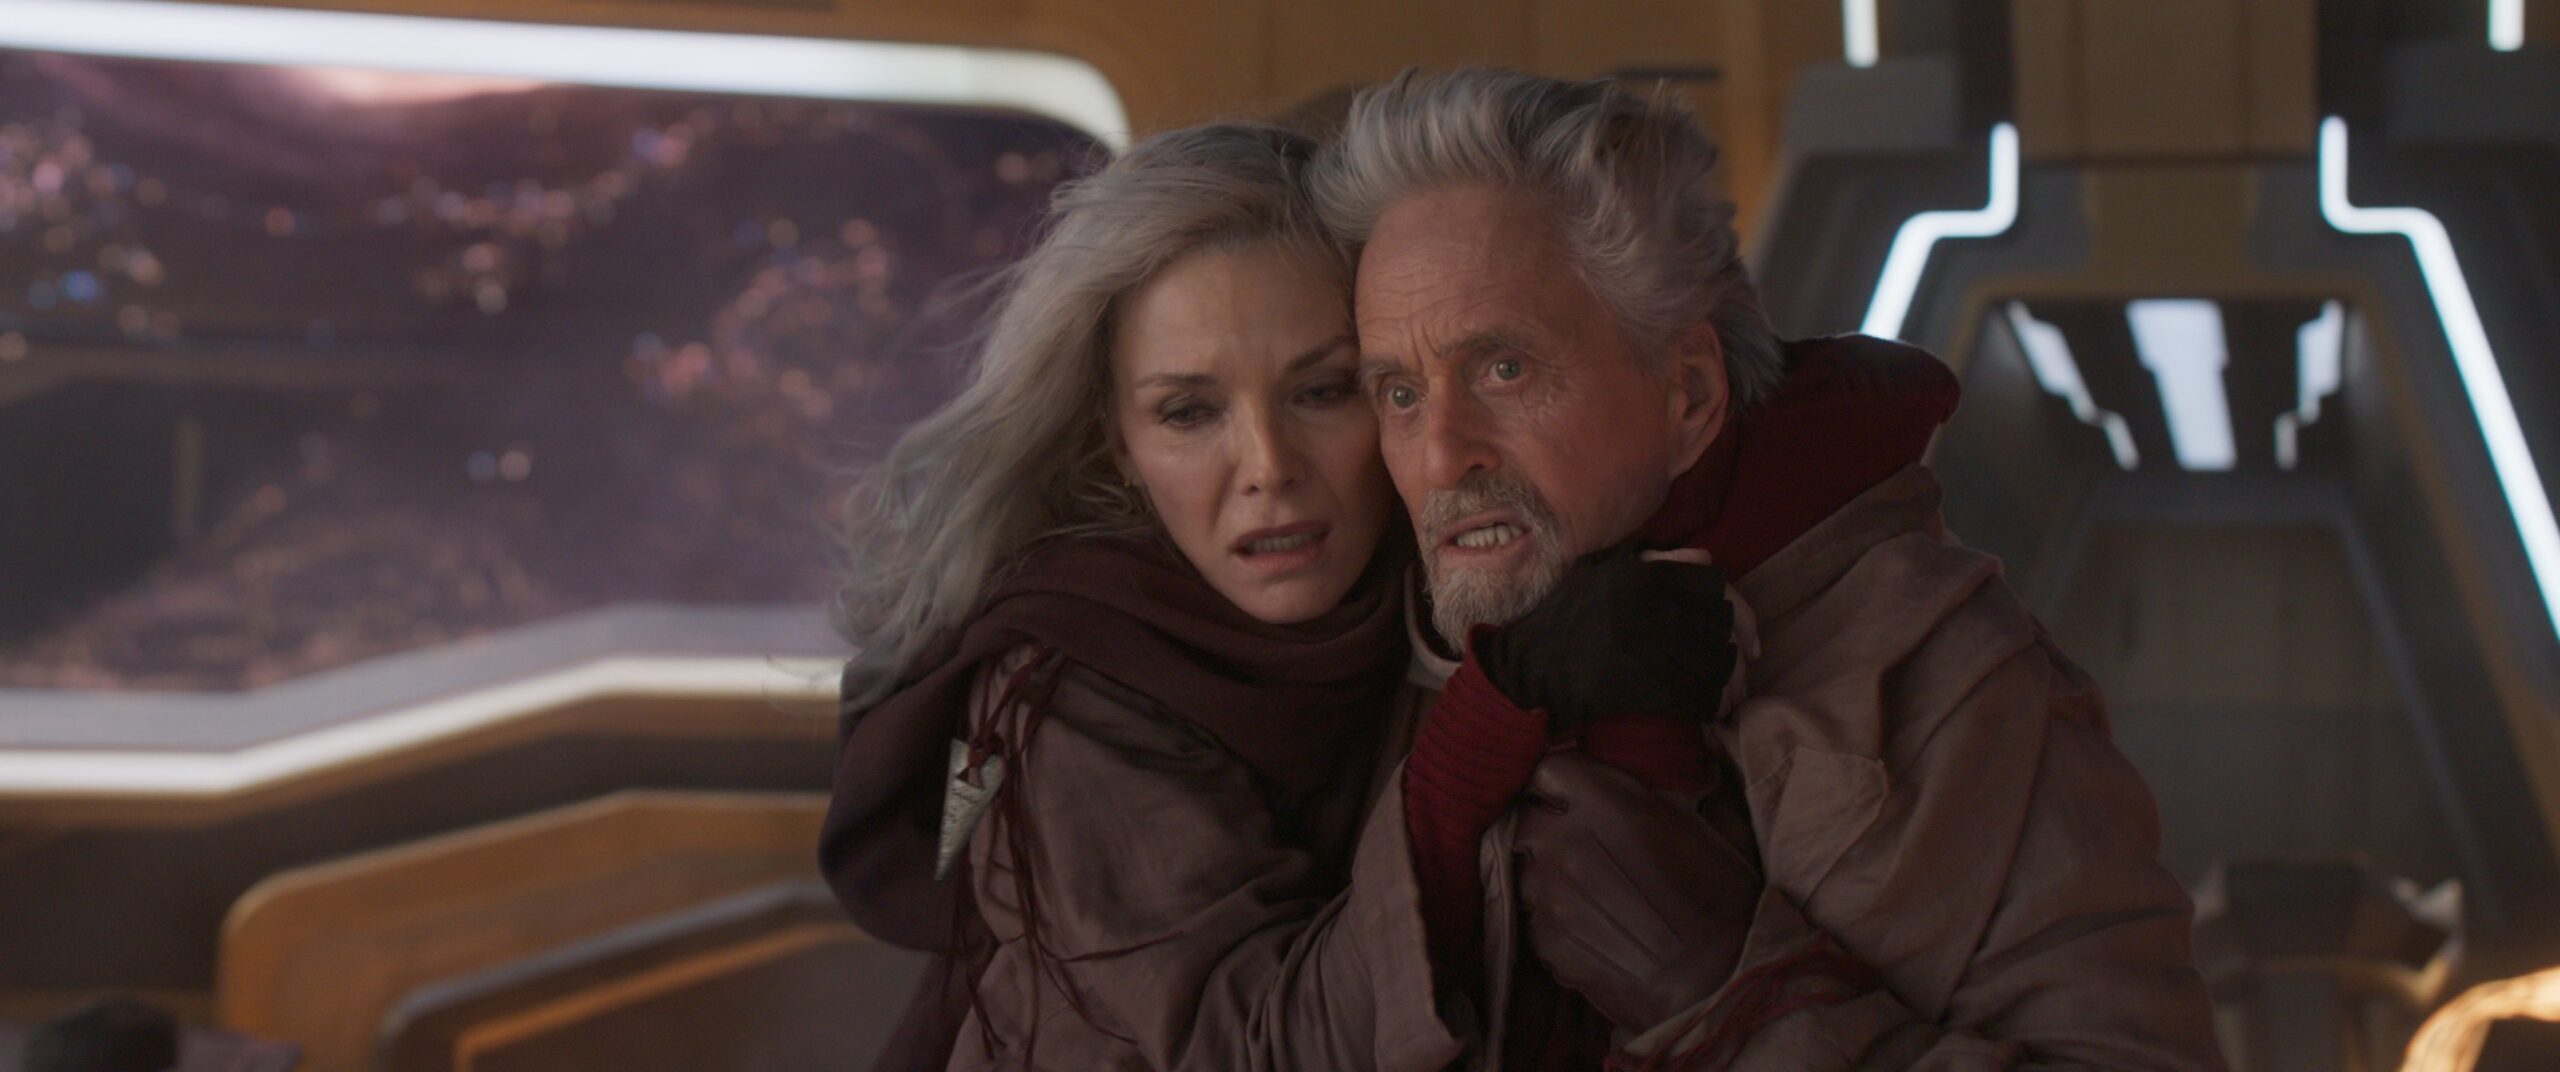 Ant-Man and the Wasp: Quantumania (2023)
Michelle Pfieffer as Janet van Dyne 
 Michael Douglas as Hank Pym
*Filmstill - Editorial Use Only* see Special Instructions.,Image: 770809038, License: Rights-managed, Restrictions: Filmstill //  EDITORIAL USE ONLY!
Any agency fees are for the agencyÕs services only, and do not, nor are they intended to convey to the user any ownership of Copyright or License in the material. The agency does not claim any ownership including but not limited to Copyright or License in the attached material. By publishing this material you expressly agree to indemnify and to hold the agency and its directors, shareholders and employees harmless from any loss, claims, damages, demands, expenses (including legal fees), or any causes of action or allegation against the agency arising out of or connected in any way with publication of the material. Images should only be used for editorial purposes by newspapers or magazines or websites in connection with the movie (etc) and with Real Name as Character Name in Film Title (year)
Filmstill //  EDITORIAL USE ONLY!
Any agency fees are for the agency’s services only, and do not, nor are they intended to convey to the user any ownership of Copyright or License in the material. The agency does not claim any ownership including but not limited to Copyright or License in the attached material. By publishing this material you expressly agree to indemnify and to hold the agency and its directors, shareholders and employees harmless from any loss, claims, damages, demands, expenses (including legal fees), or any causes of action or allegation against the agency arising out of or connected in any way with publication of the material. Images should only be used for editorial purposes by newspapers or magazines or websites in connection with the movie (etc) and with Real Name as Character Name in Film Title (year), ***
HANDOUT image or SOCIAL MEDIA IMAGE or FILMSTILL for EDITORIAL USE ONLY! * Please note: Fees charged by Profimedia are for the Profimedia's services only, and do not, nor are they intended to, convey to the user any ownership of Copyright or License in the material. Profimedia does not claim any ownership including but not limited to Copyright or License in the attached material. By publishing this material you (the user) expressly agree to indemnify and to hold Profimedia and its directors, shareholders and employees harmless from any loss, claims, damages, demands, expenses (including legal fees), or any causes of action or allegation against Profimedia arising out of or connected in any way with publication of the material. Profimedia does not claim any copyright or license in the attached materials. Any downloading fees charged by Profimedia are for Profimedia's services only. * Handling Fee Only 
***, Model Release: no, Credit line: Image  Capital Pictures / Film Stills / Profimedia